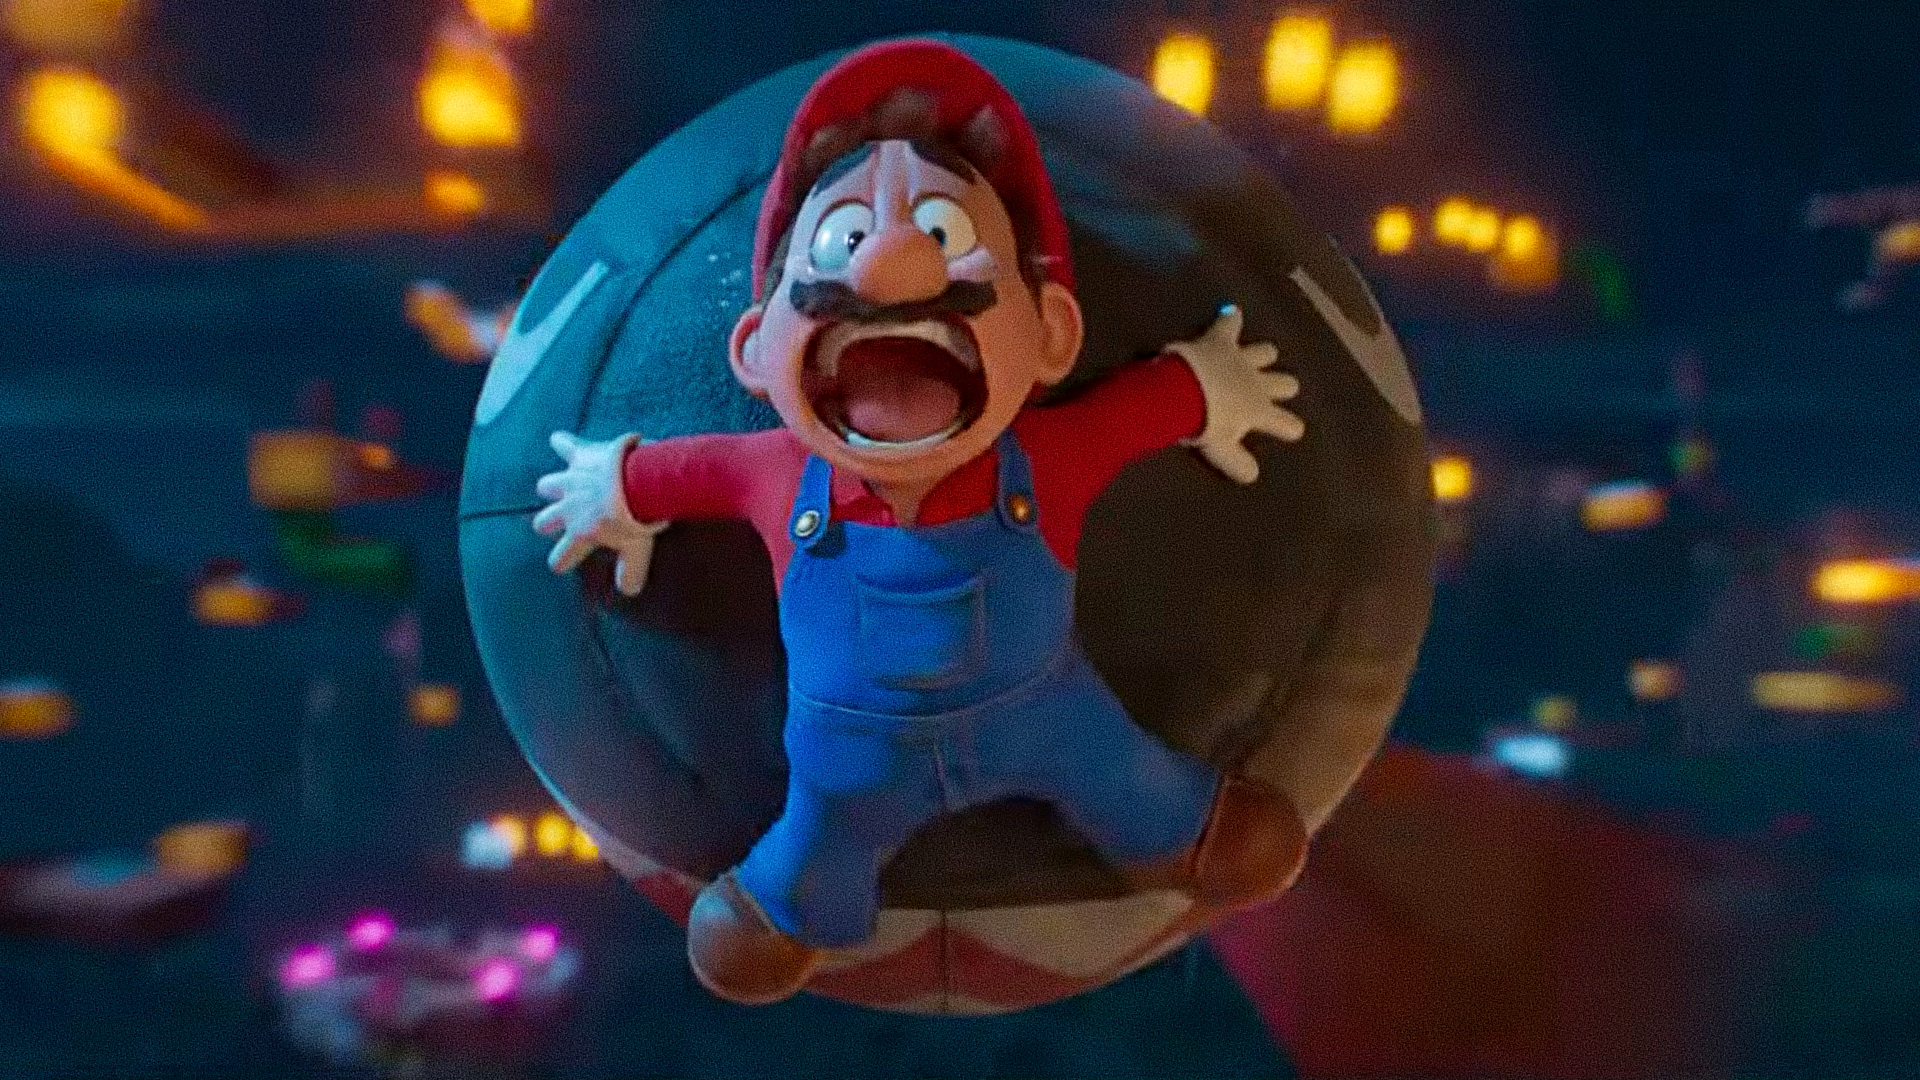 Is There a Super Mario Bros Movie Netflix Release Date? - GameRevolution